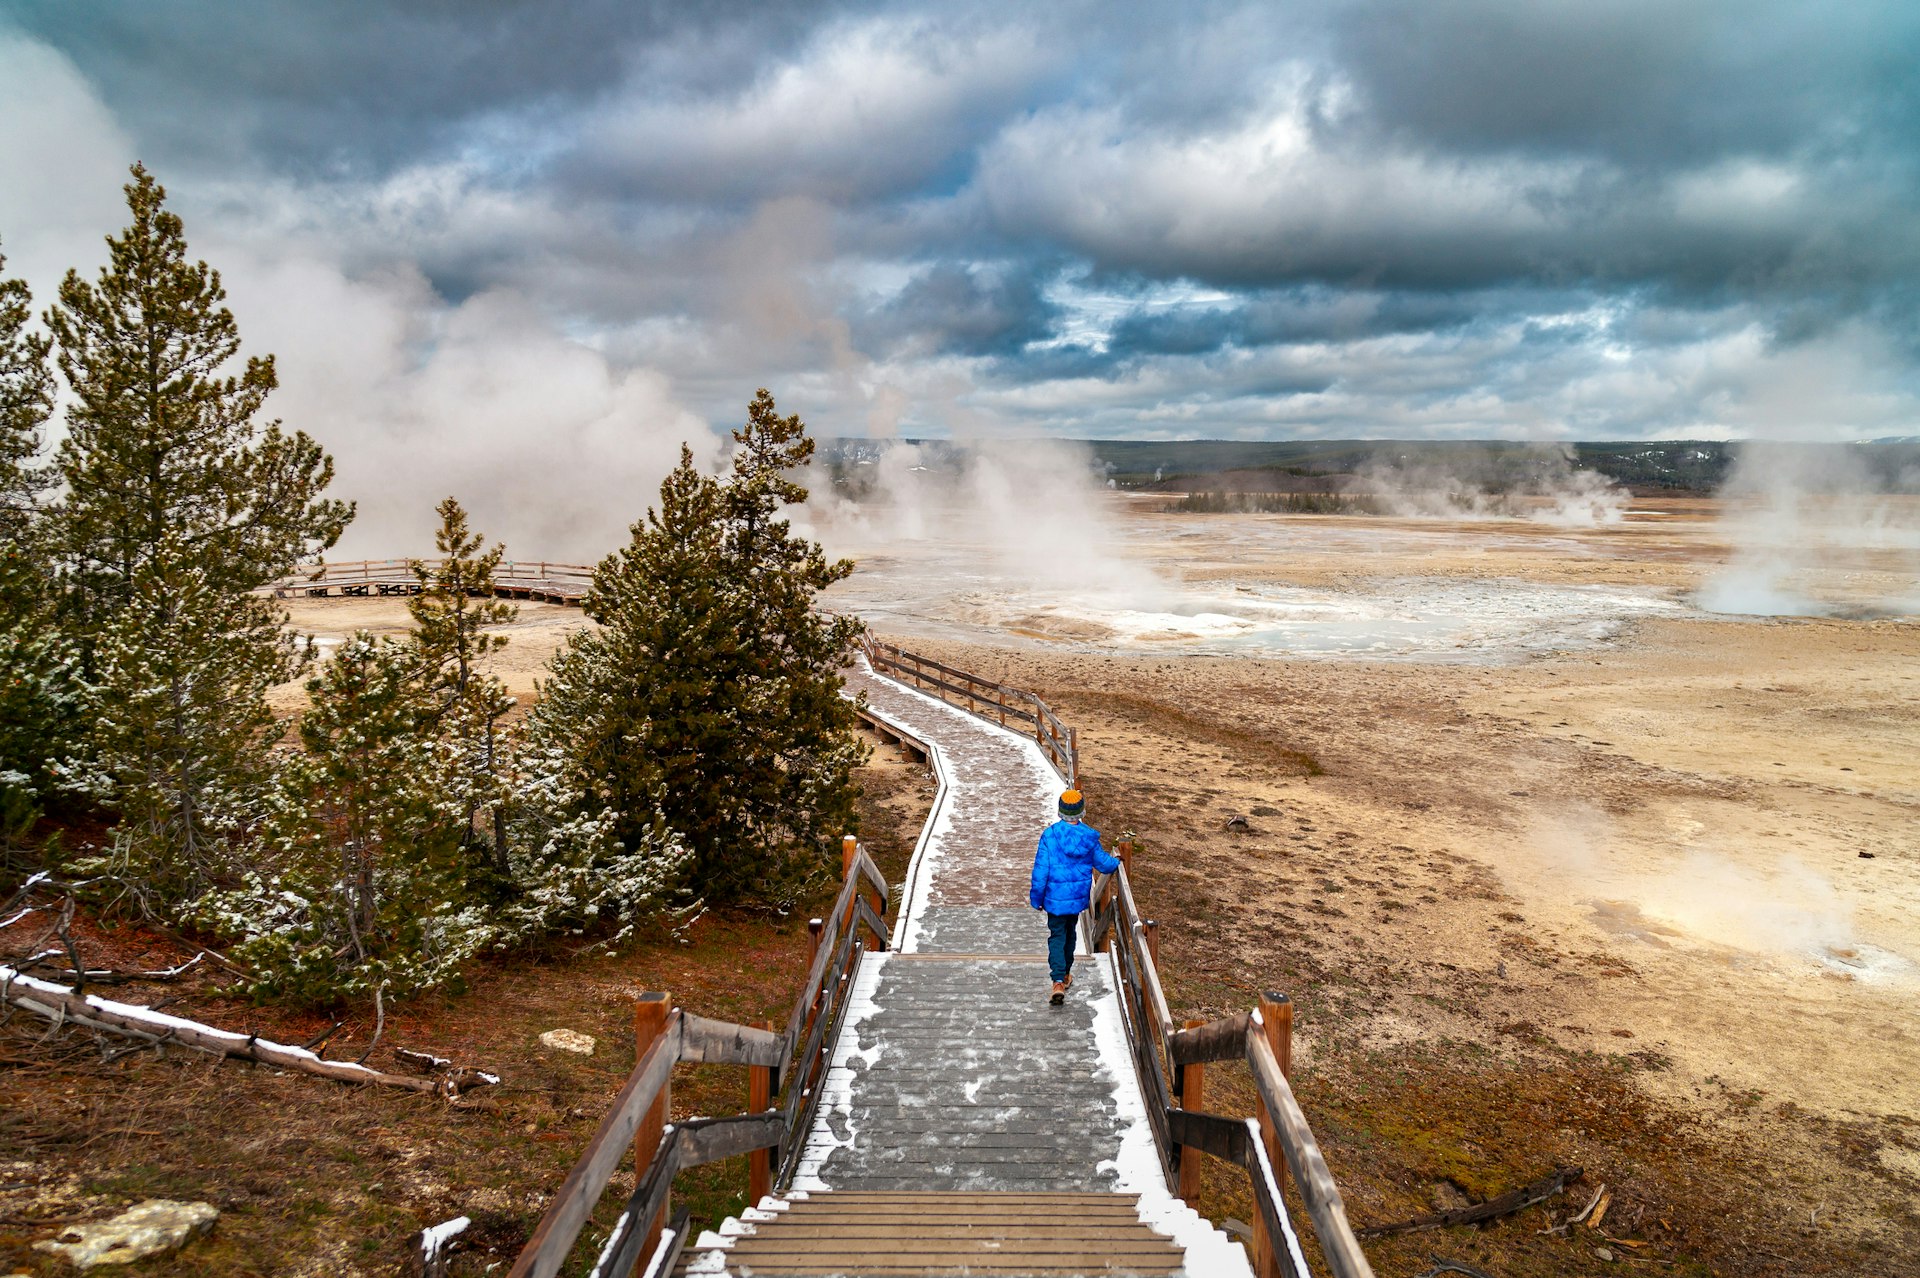 A man in hiking gear walks along a wooden walkway around the steaming geyser at Yellowstone National Park